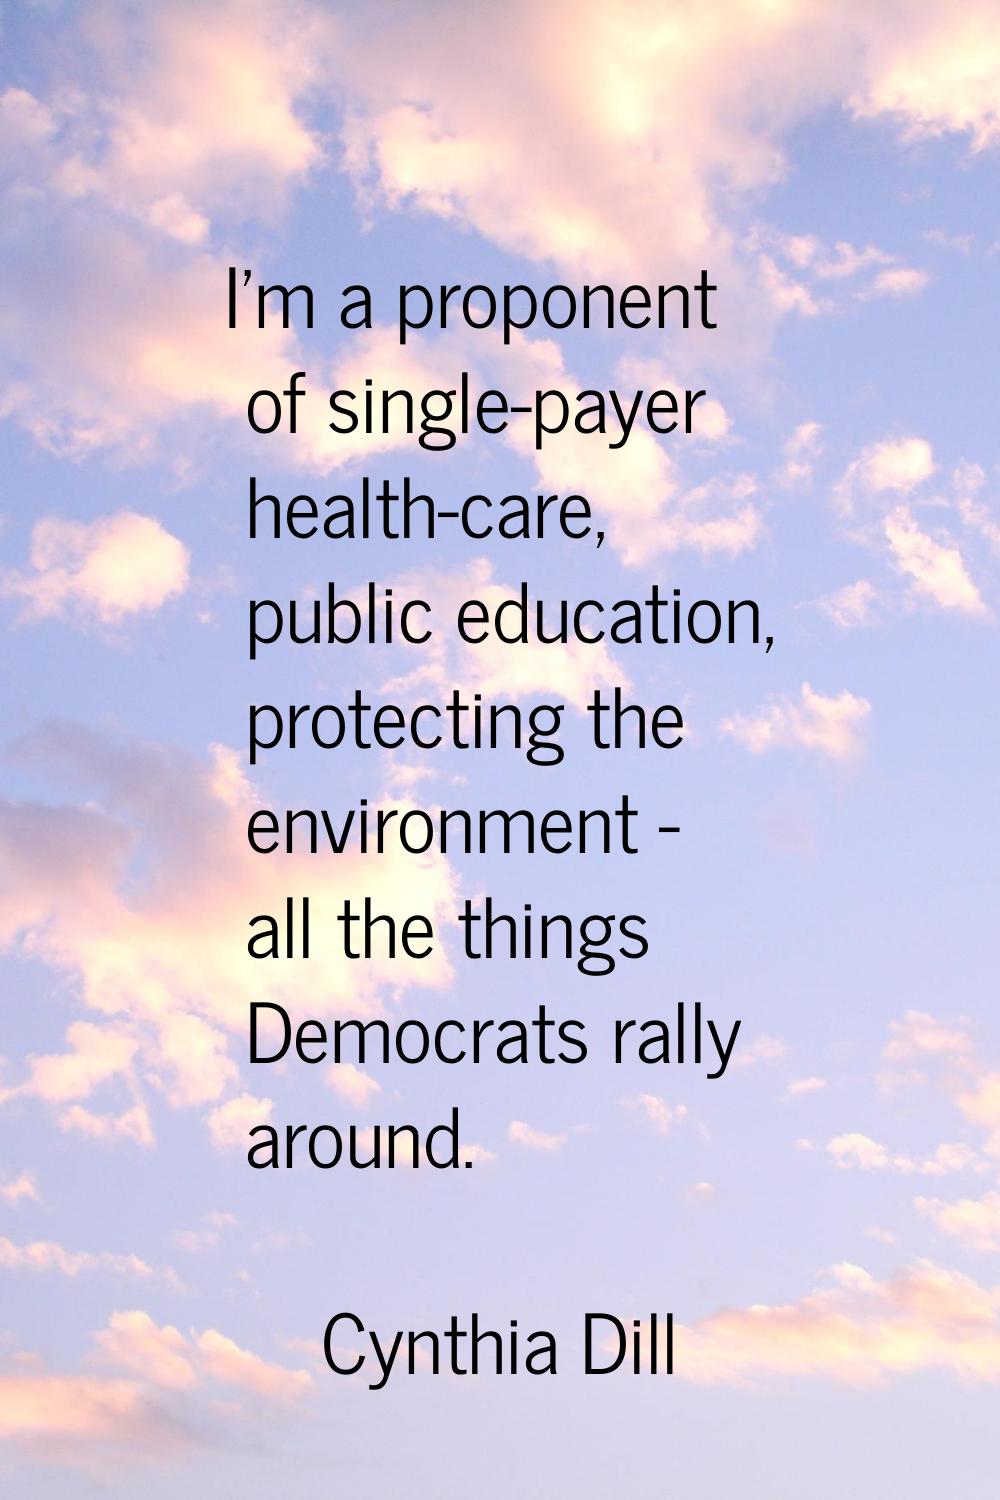 I'm a proponent of single-payer health-care, public education, protecting the environment - all the